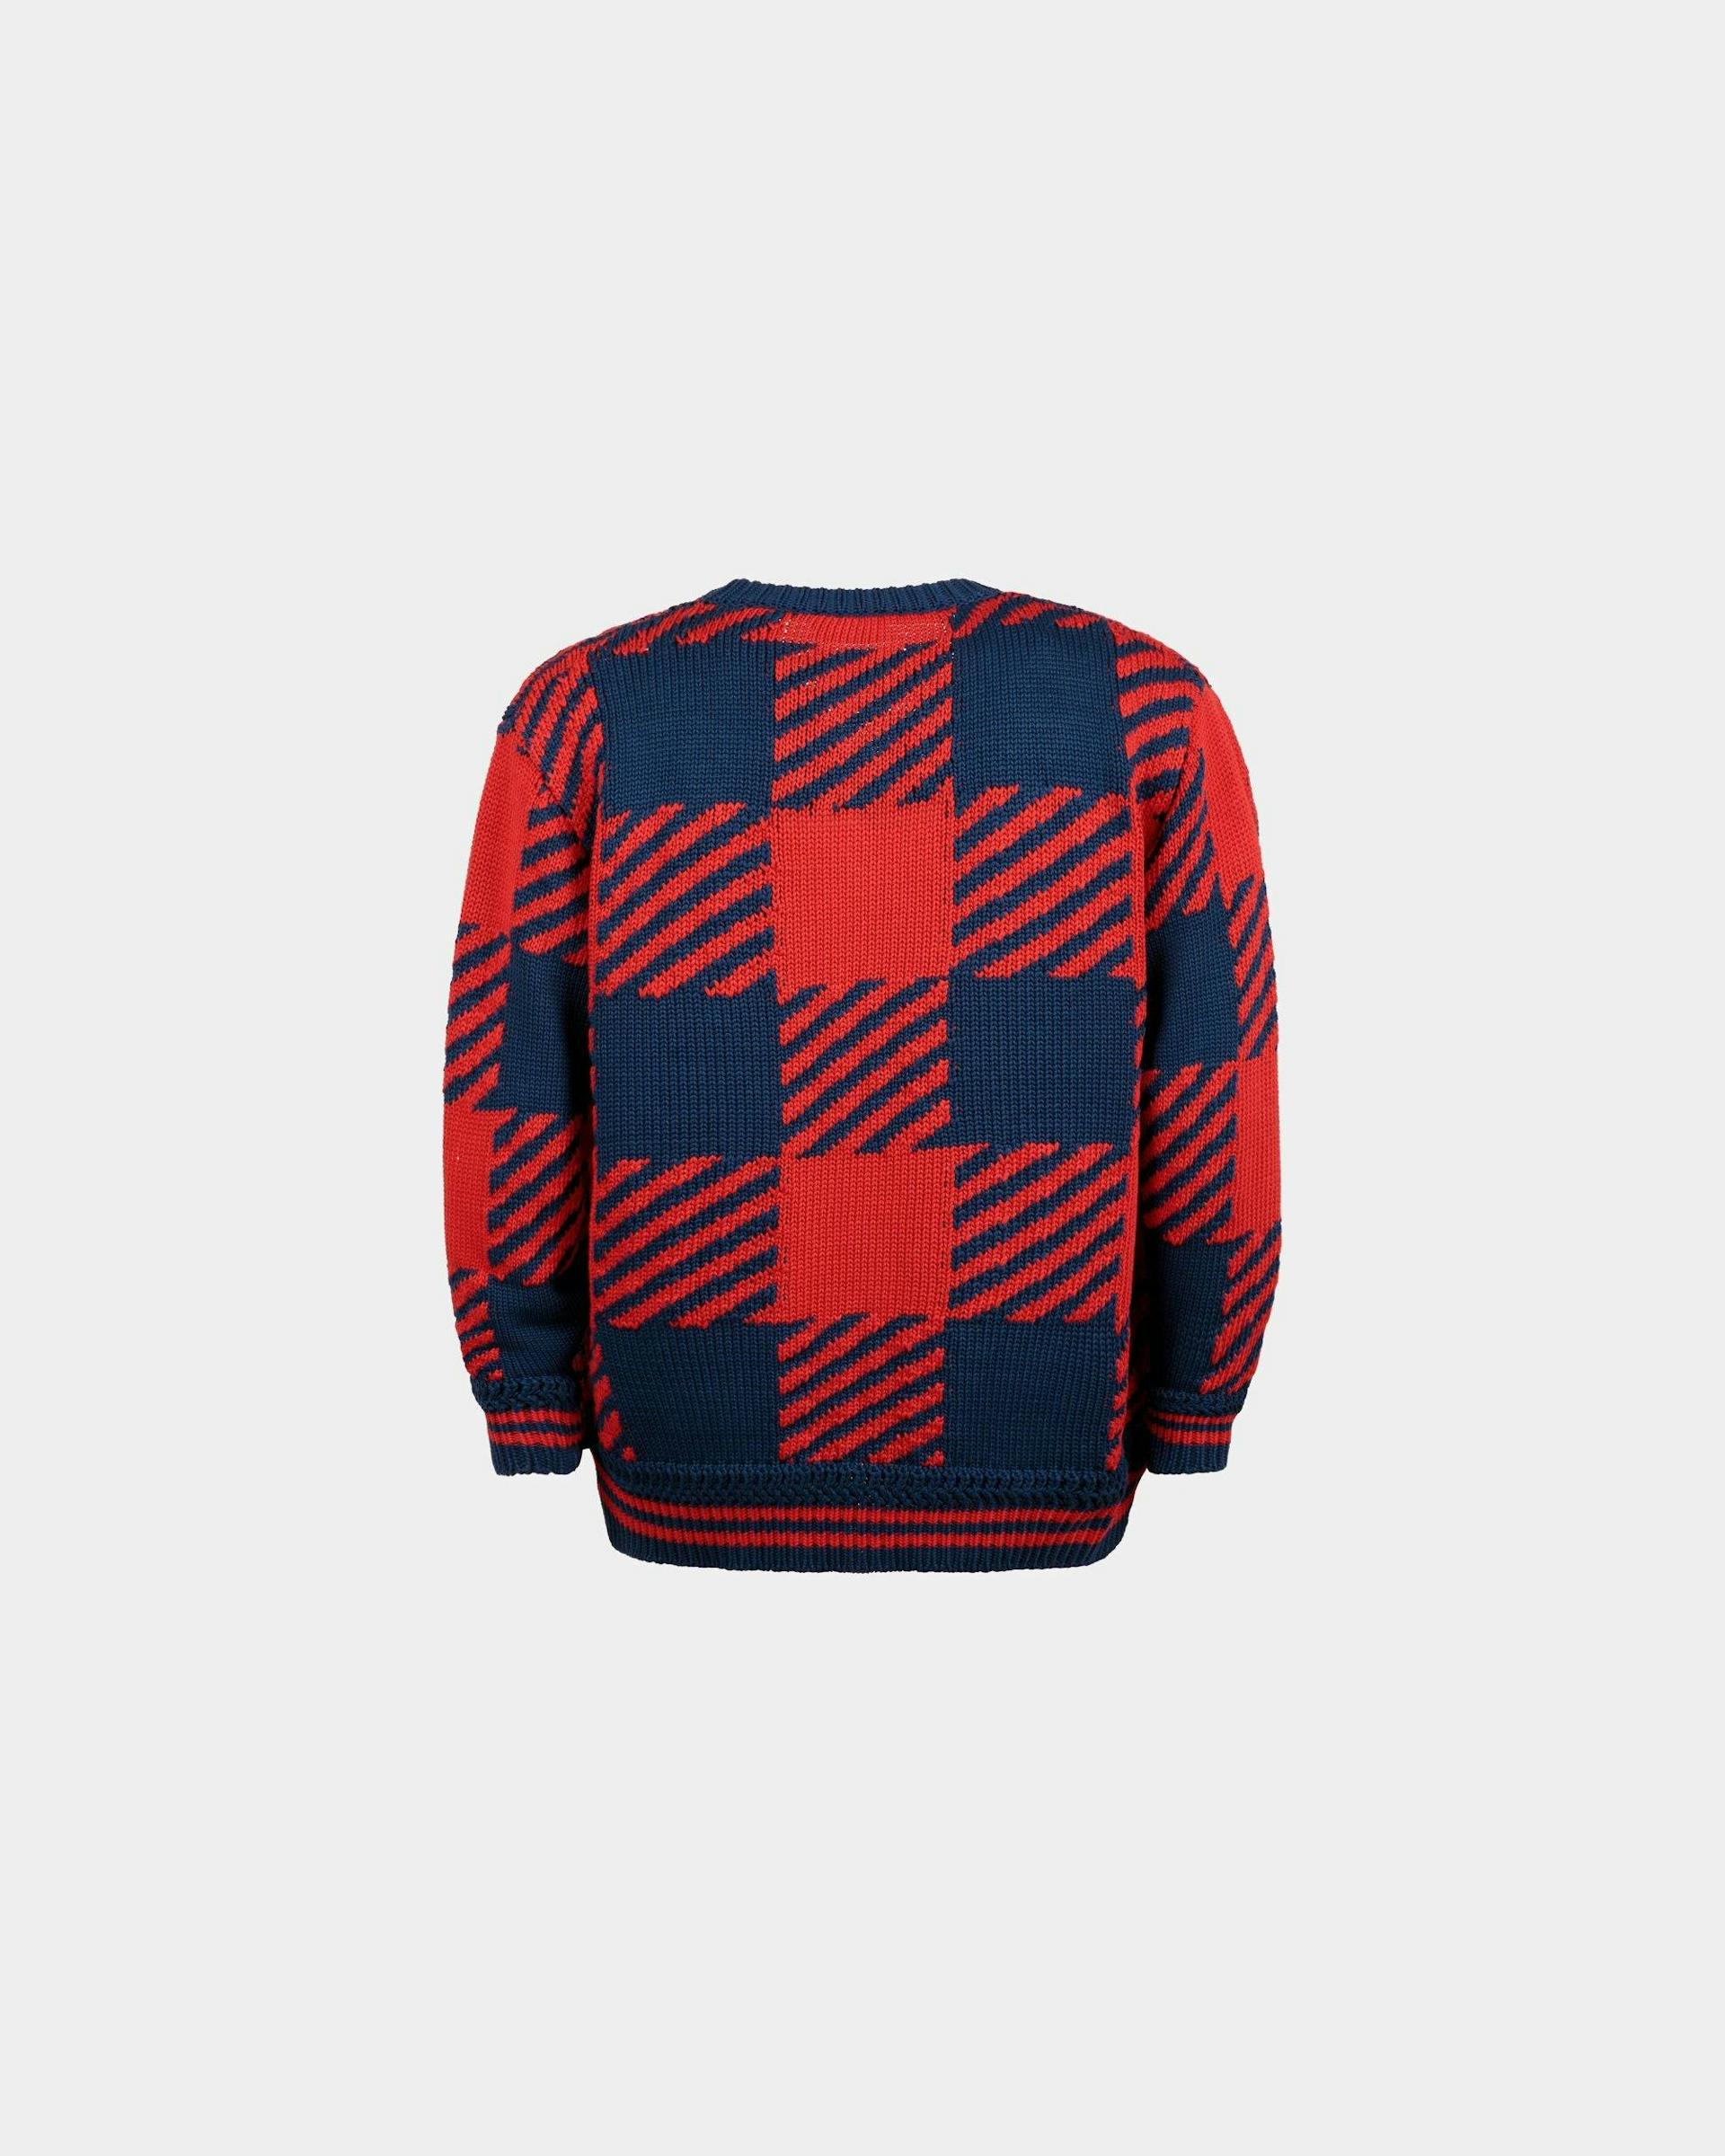 Men's V-Neck Sweater in Red and Blue Cotton | Bally | Still Life Back